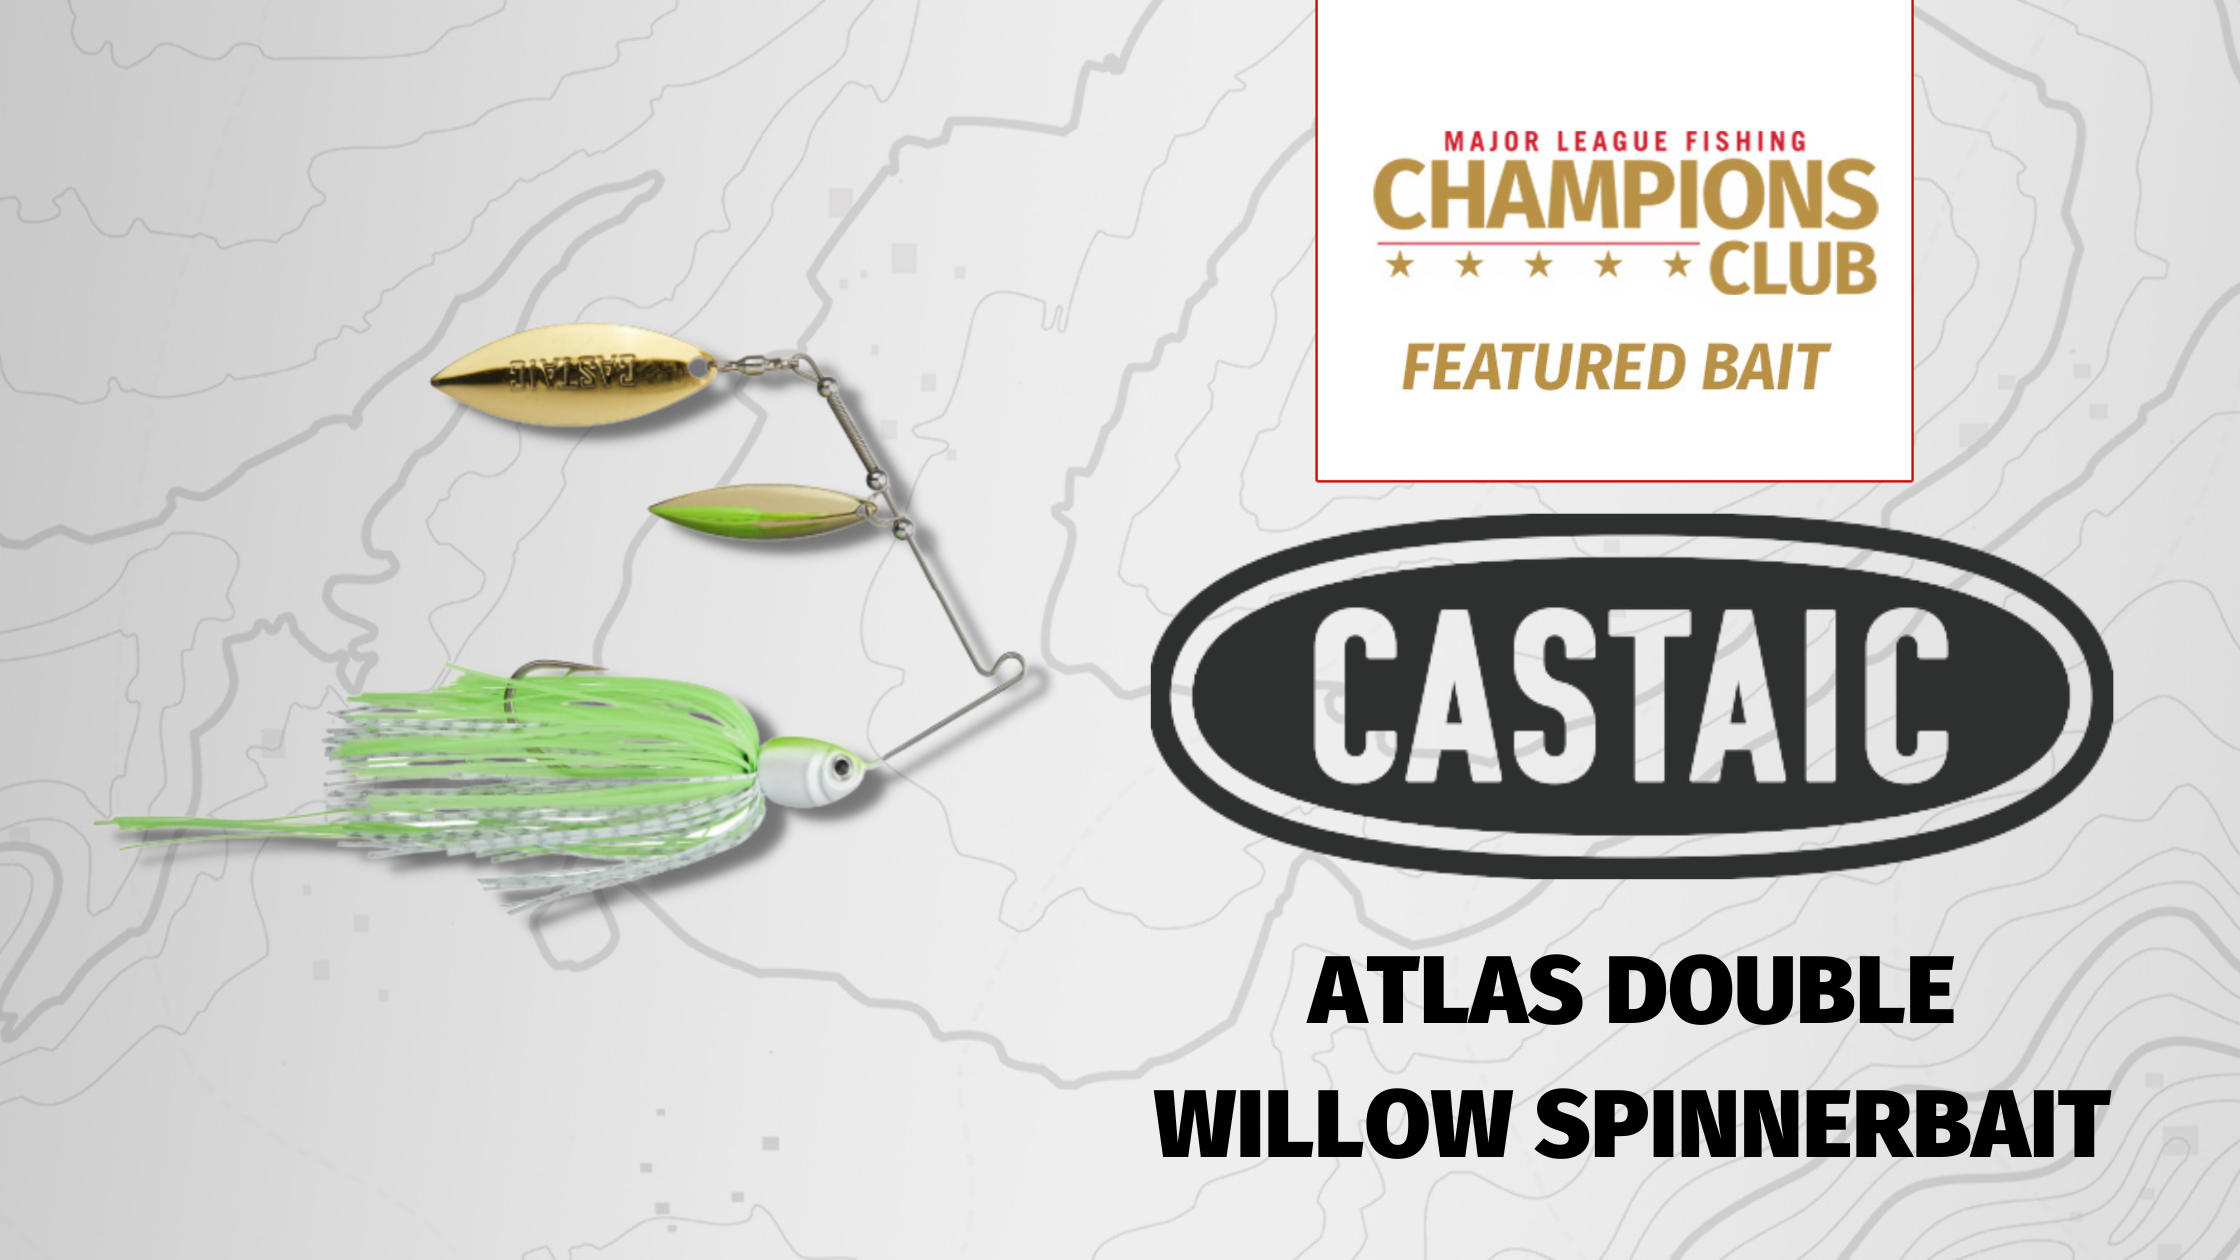 Castaic Atlas Double Willow Spinnerbait